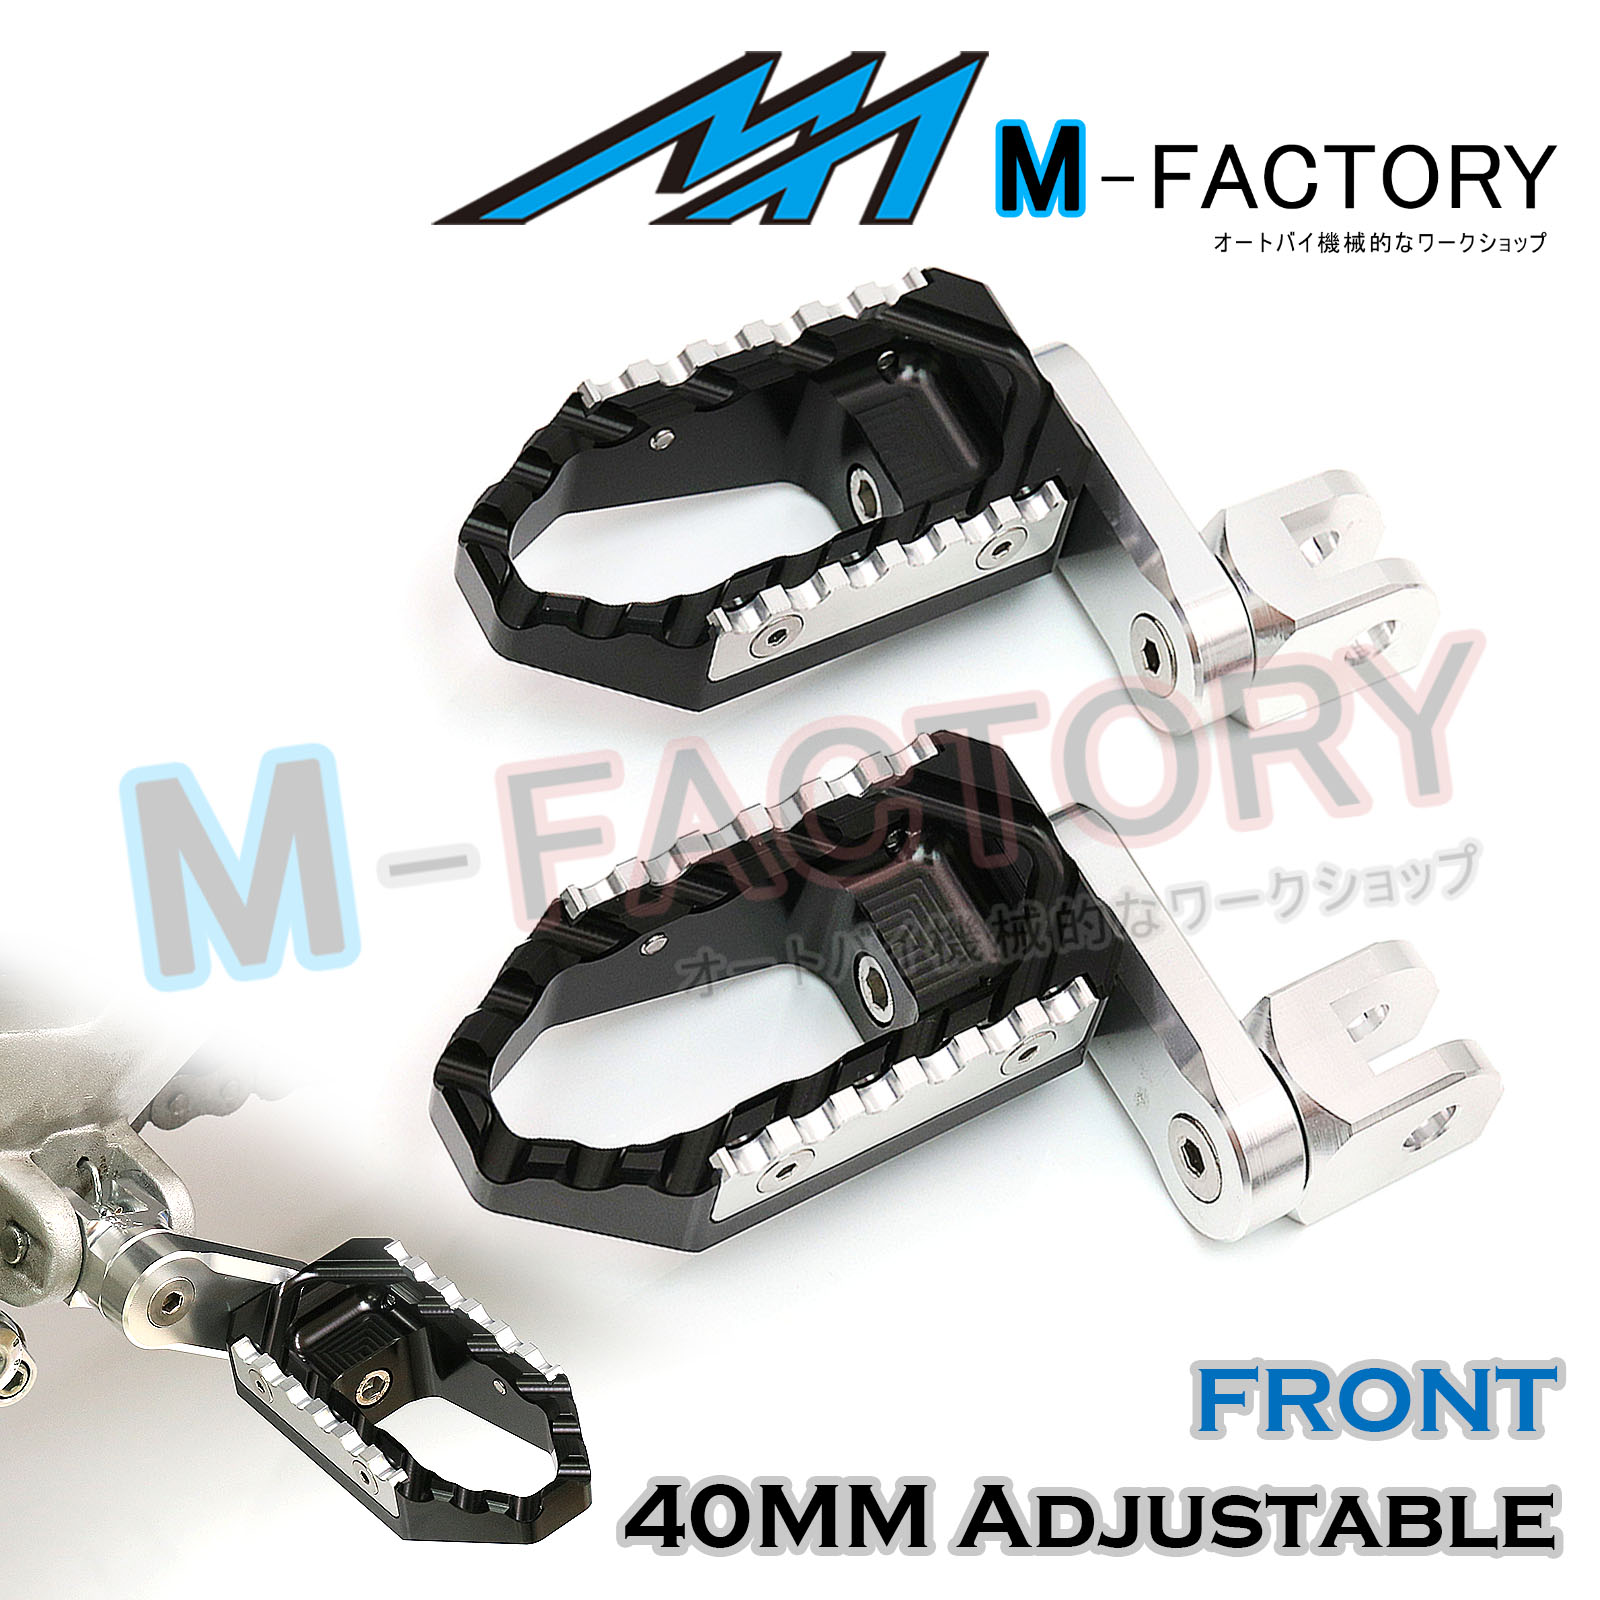 Fit Honda Z125M Monkey 40mm Adjustable Front Rider Cruise Foot Pegs